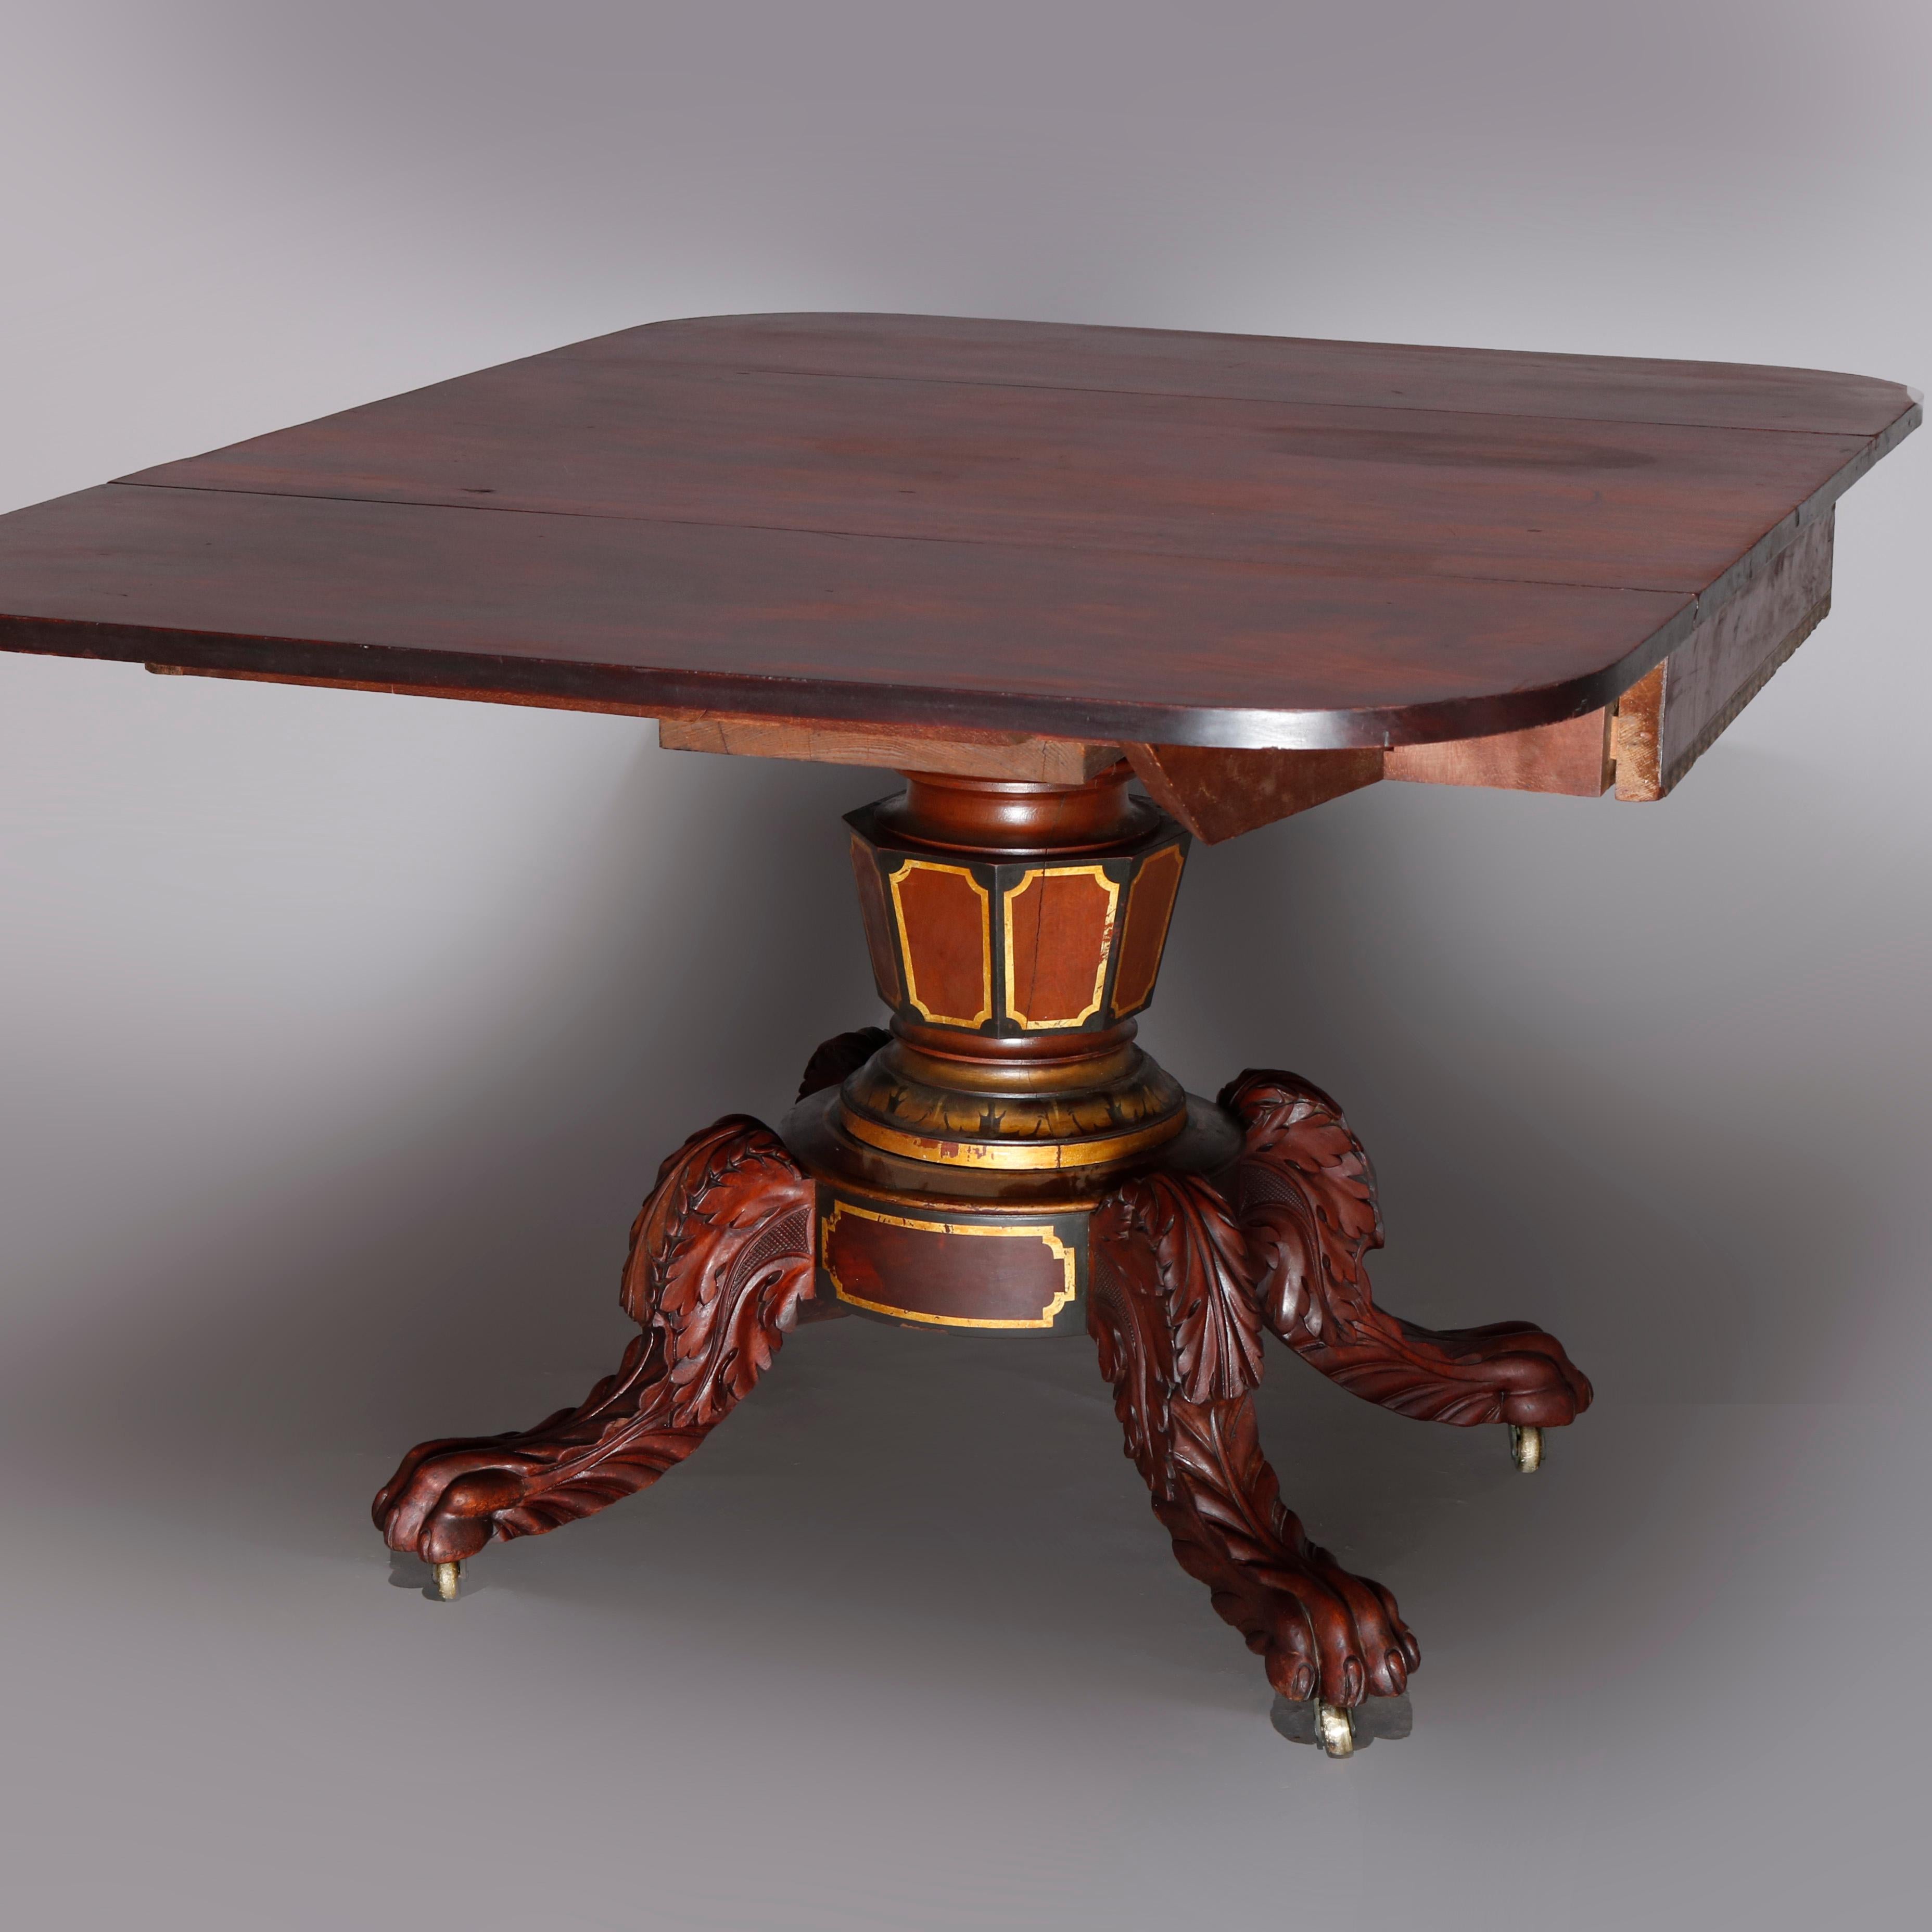 American Empire Classical Flame Mahogany and Gilt Table, Manner of Meeks 1